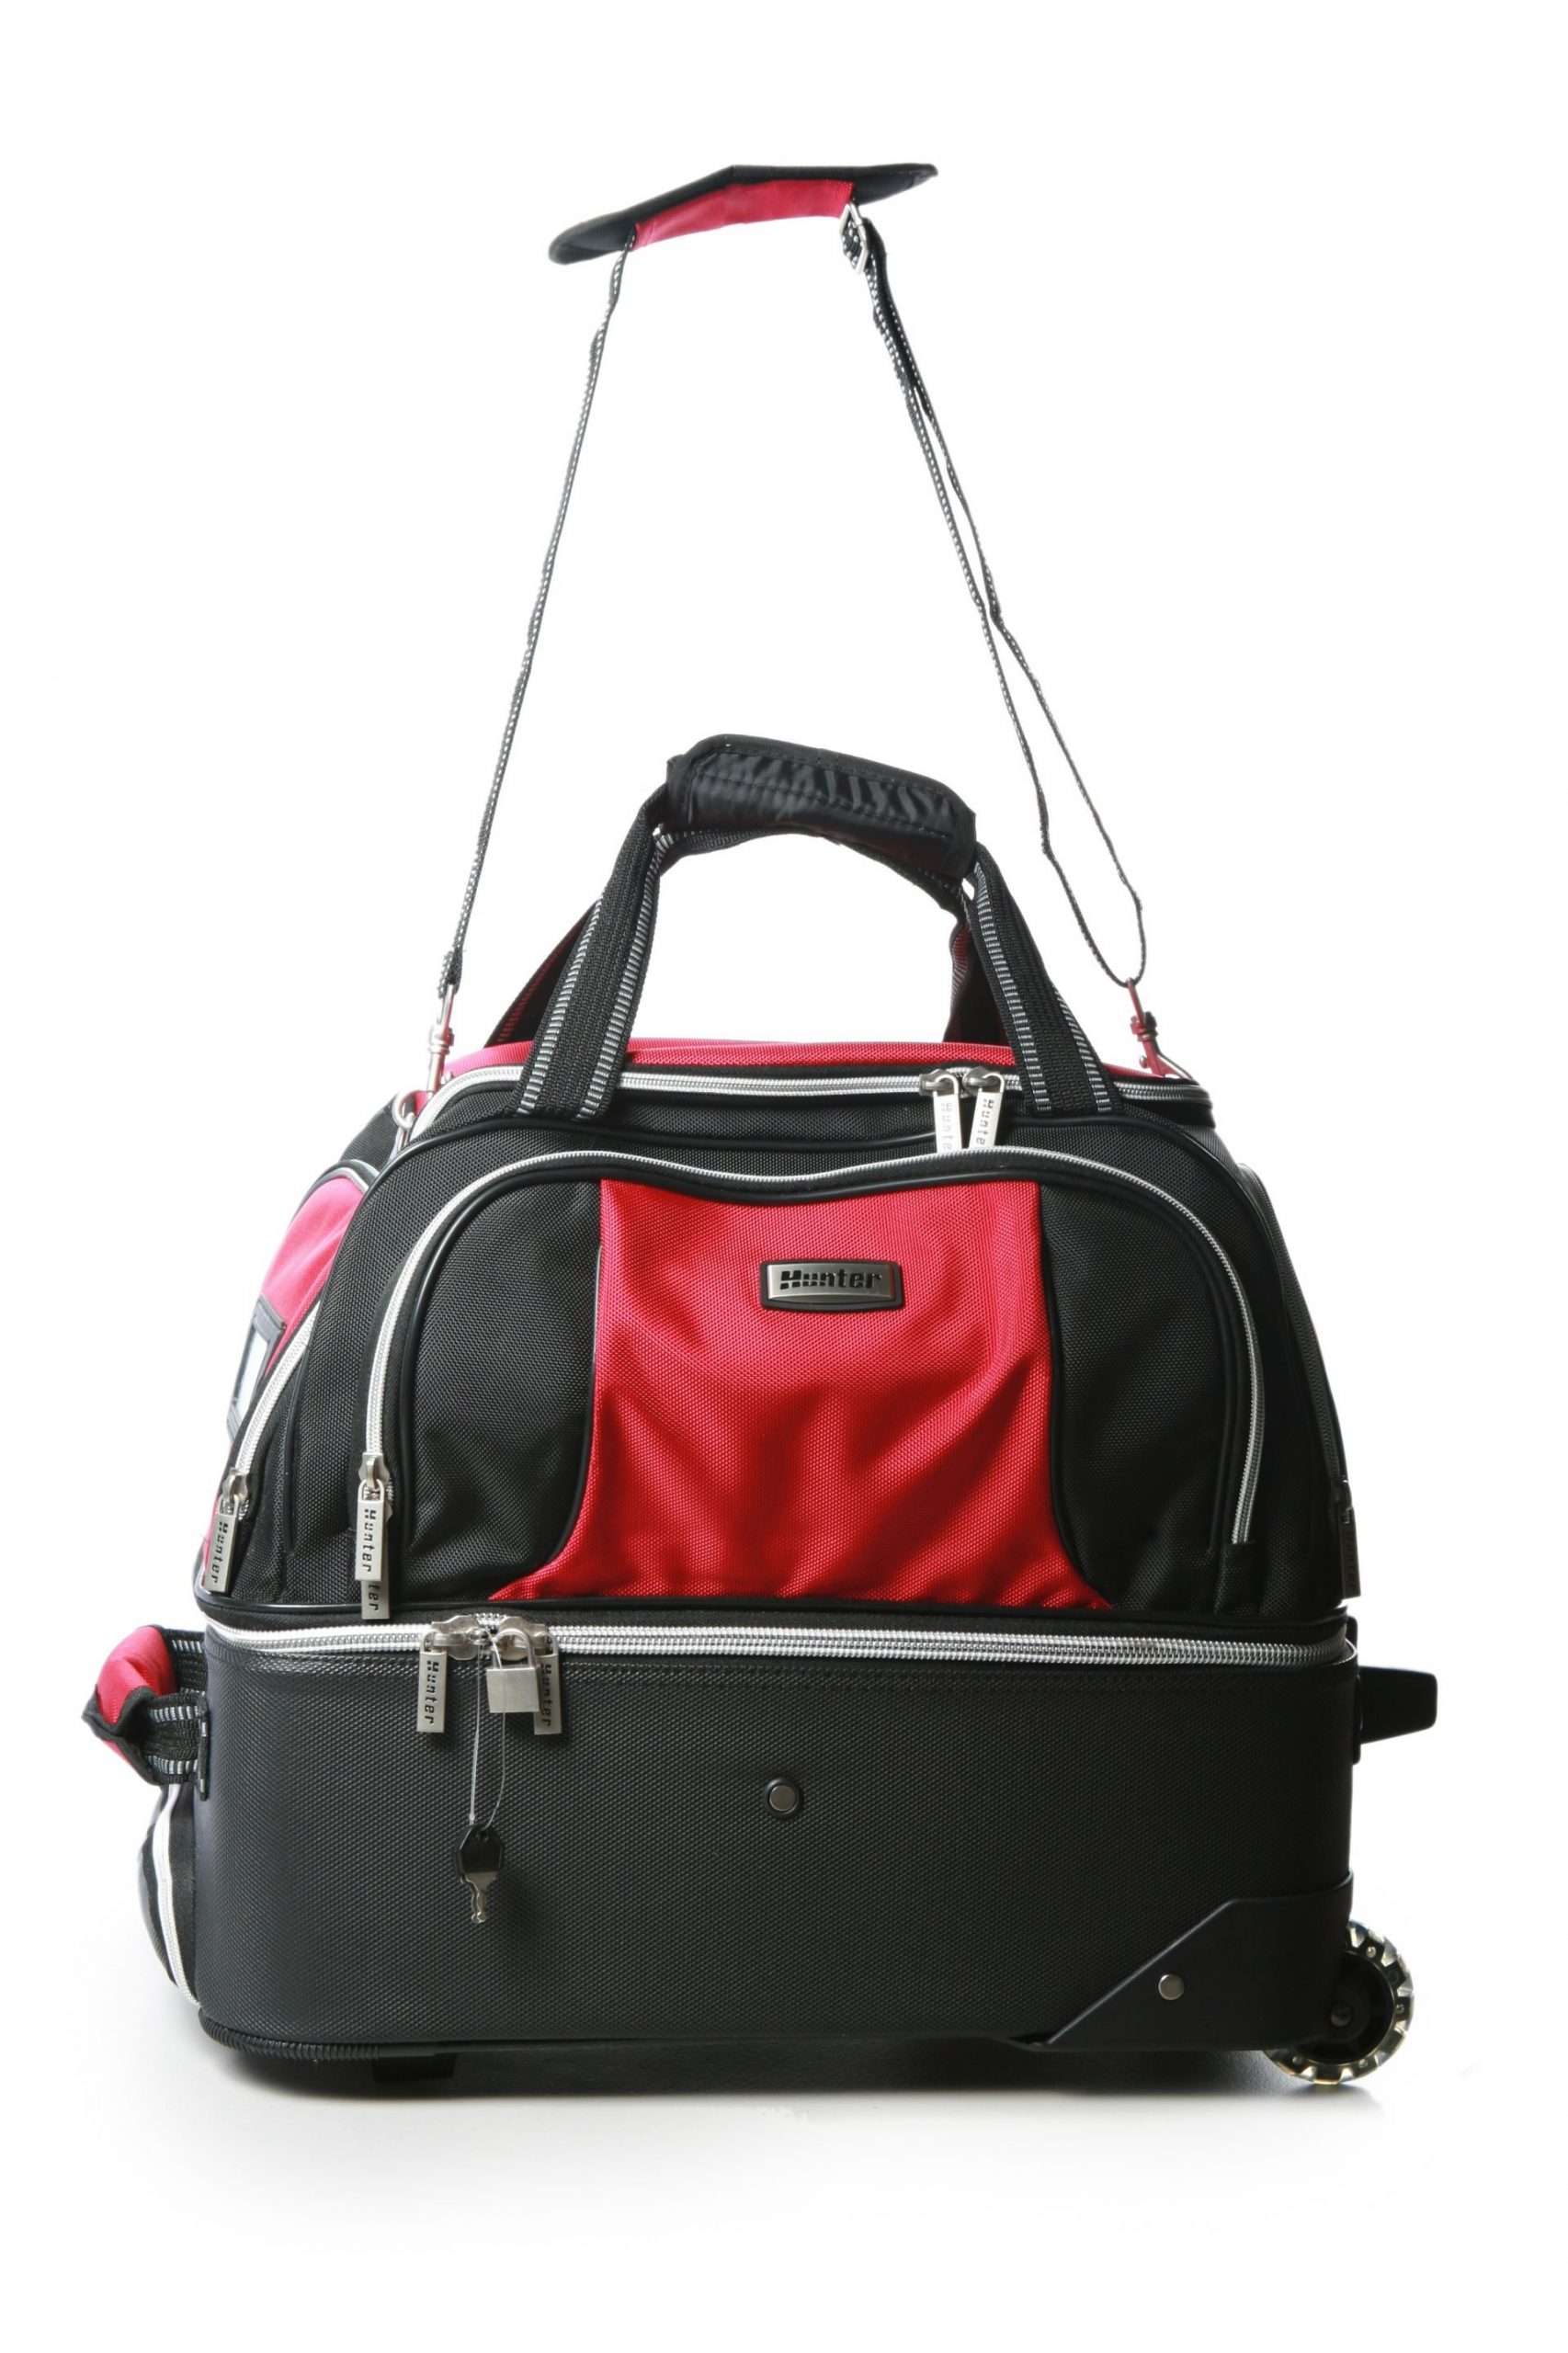 Lawn Bowls Trolley Bags For Sale | Buy Large Carry & Wheel Bag [Hunter]